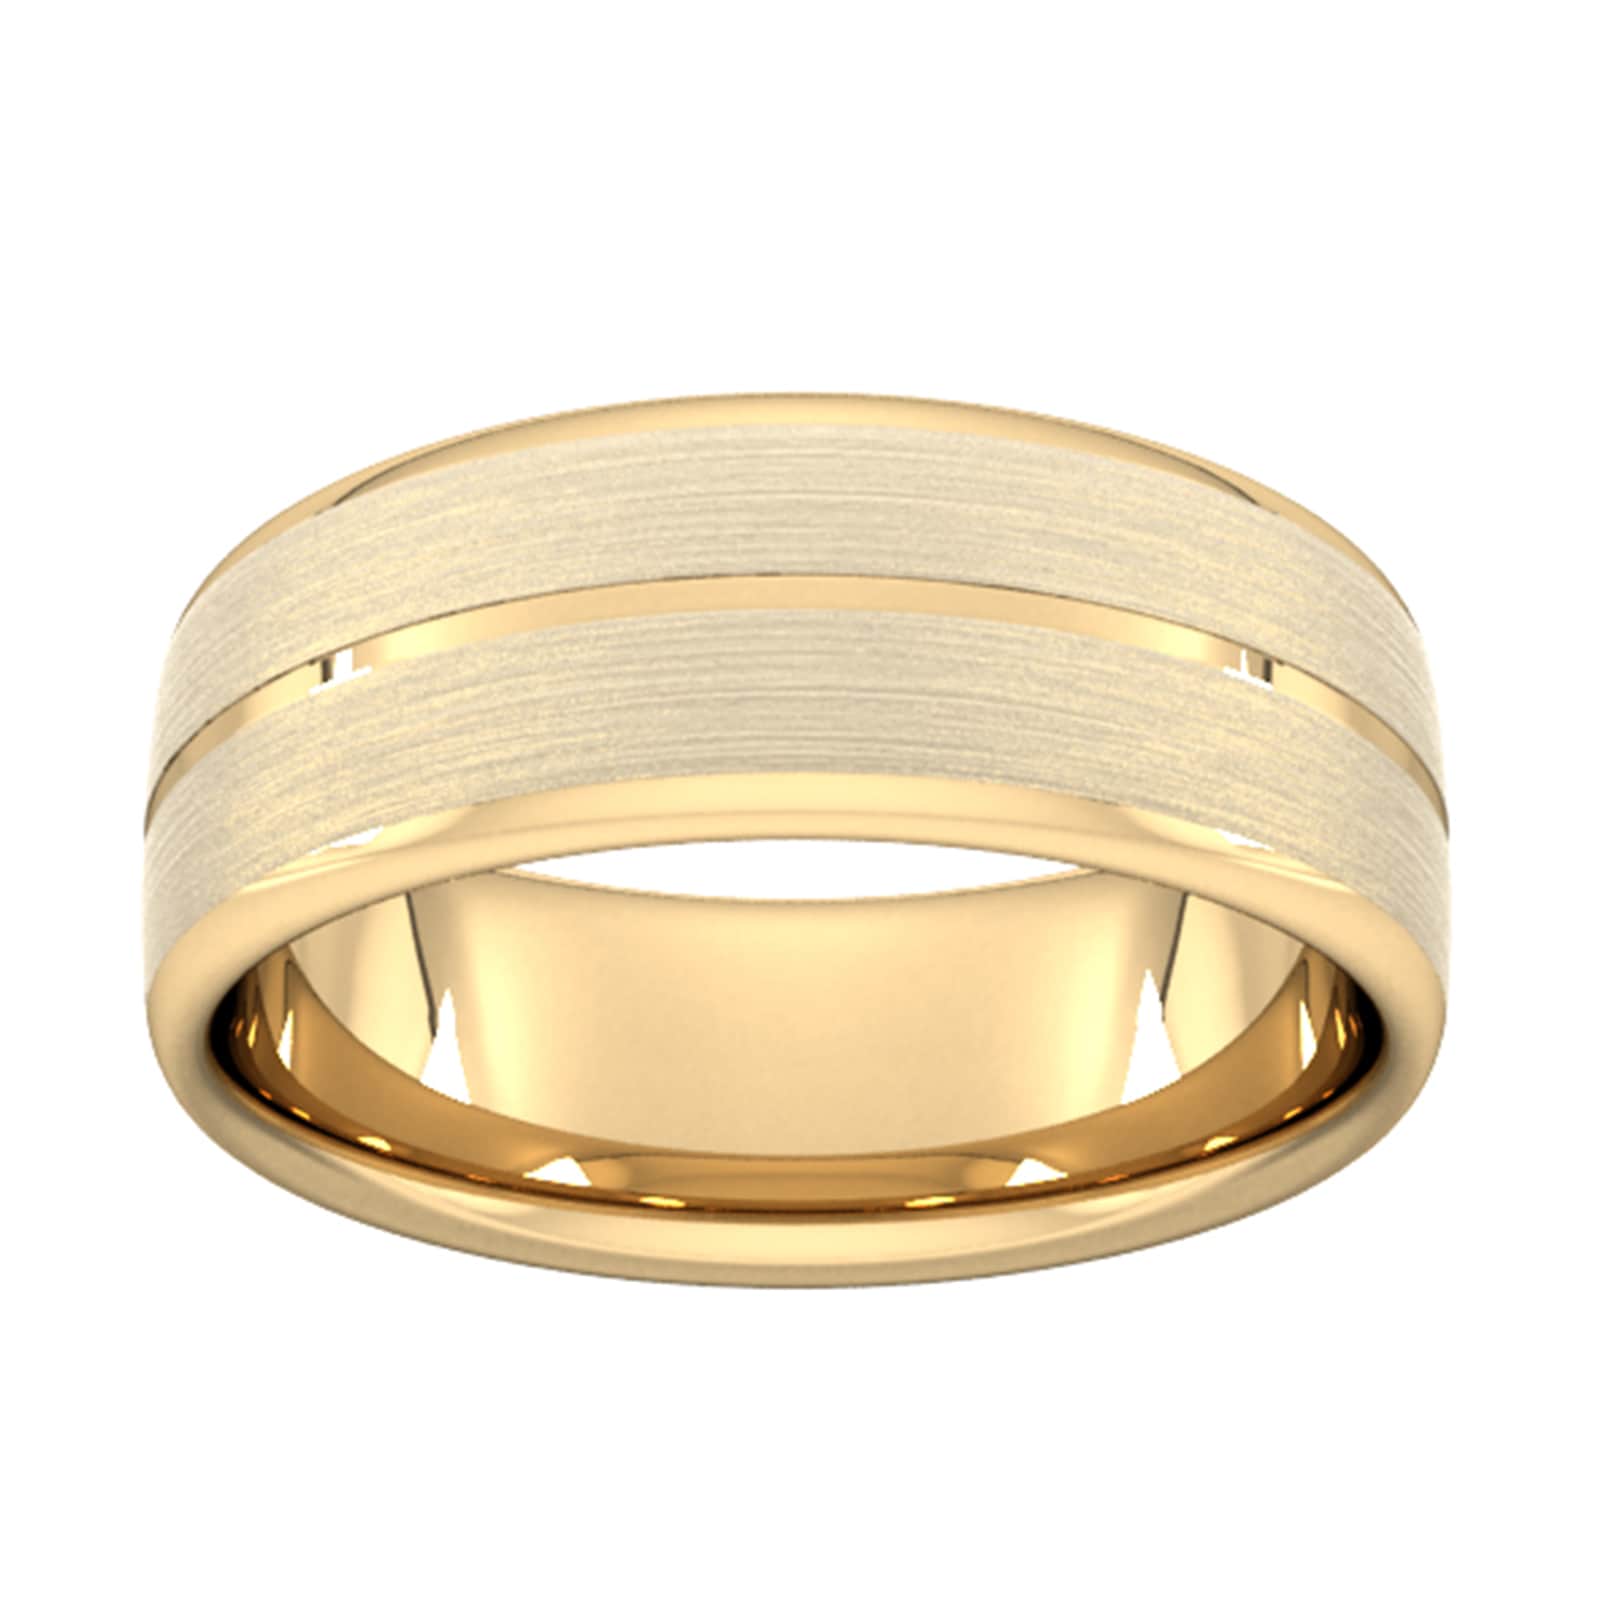 8mm Slight Court Standard Centre Groove With Chamfered Edge Wedding Ring In 18 Carat Yellow Gold - Ring Size G